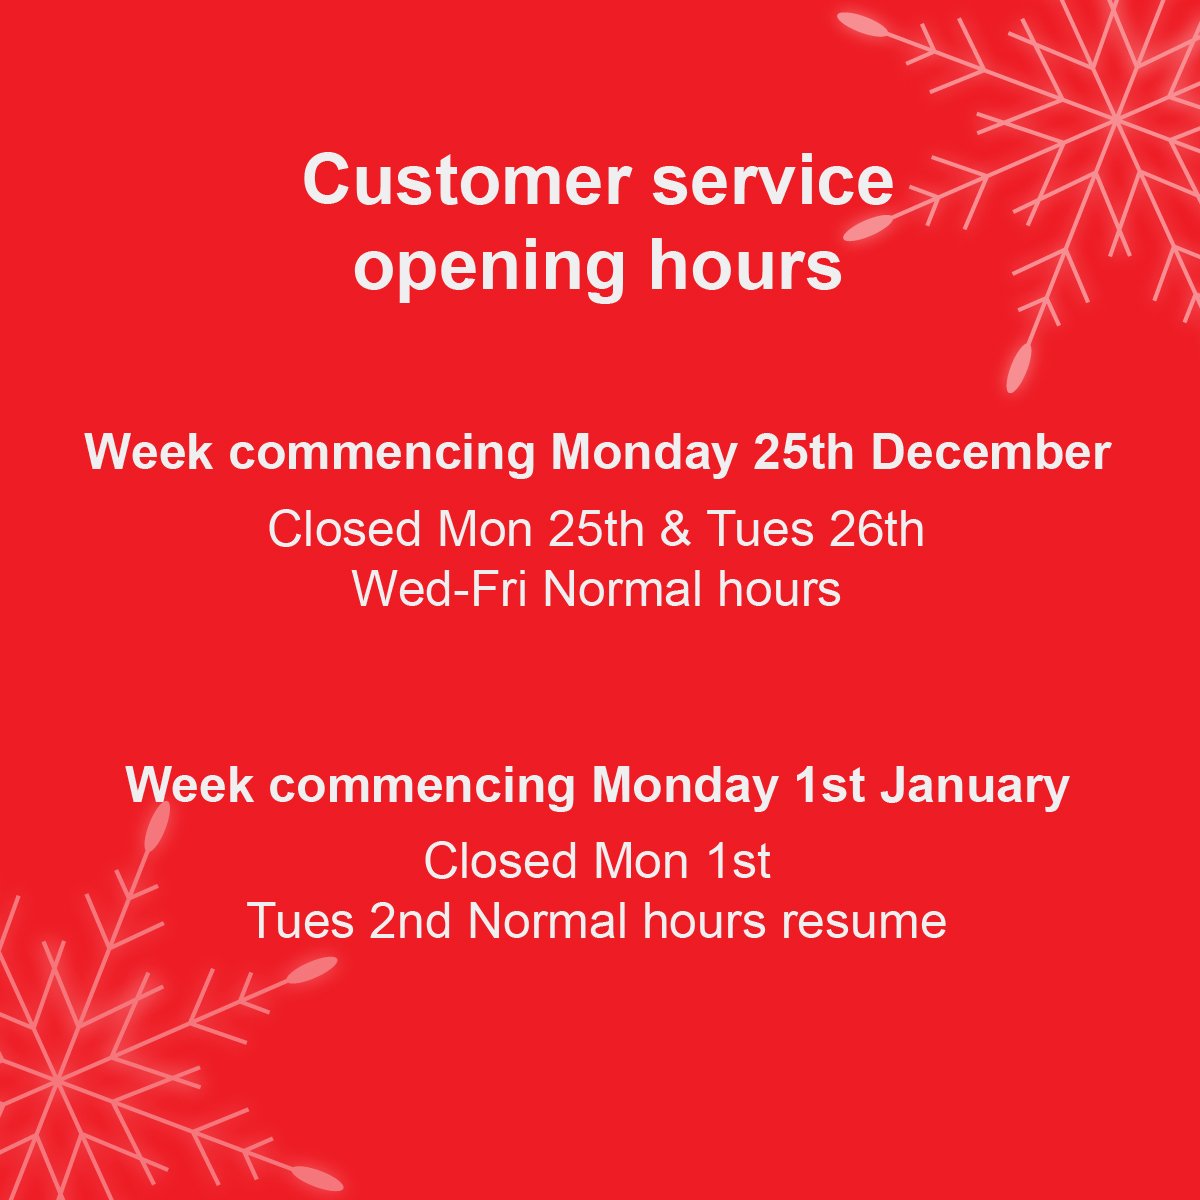 Please note the hours over Christmas that our customer service centre will be open.